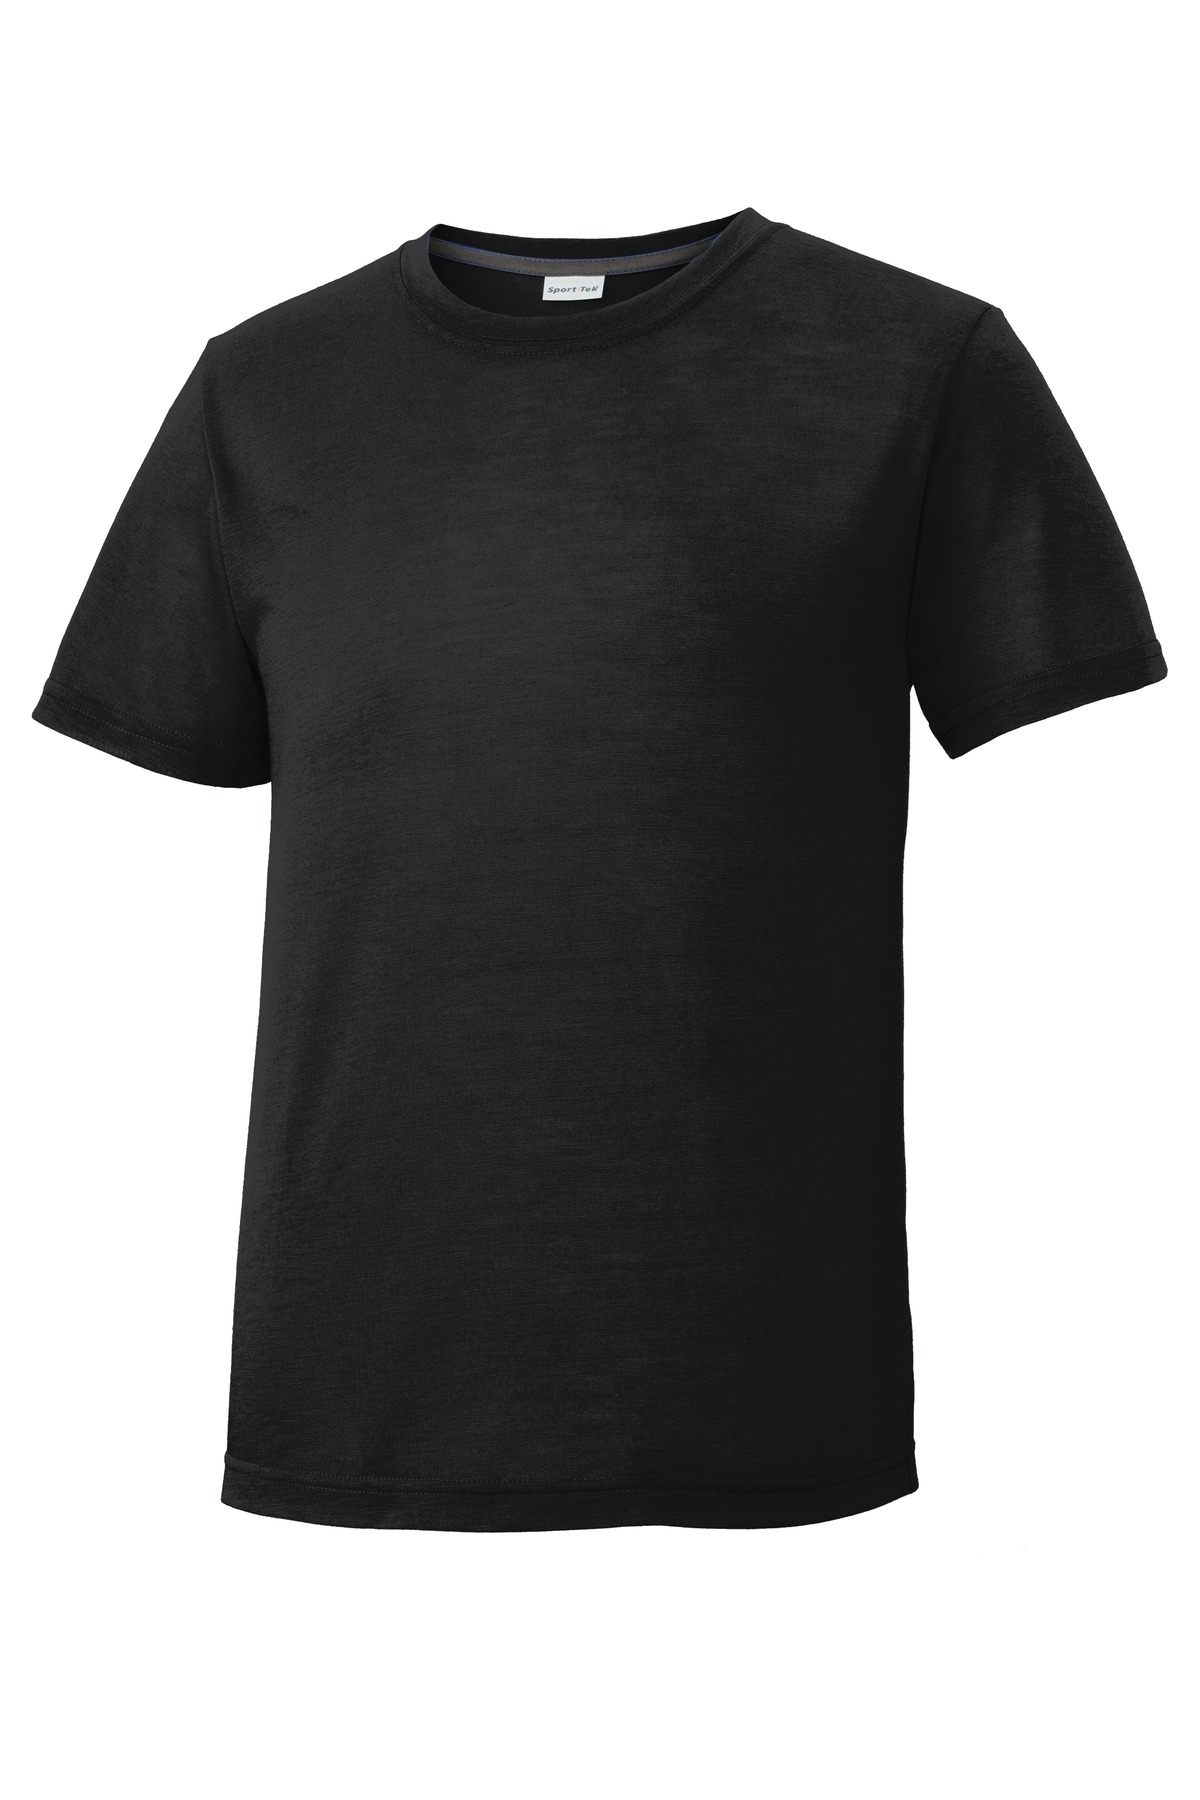 Sport-Tek Hospitality Youth T-Shirts ® Youth PosiCharge® Competitor Cotton Touch Tee.-Sport-Tek